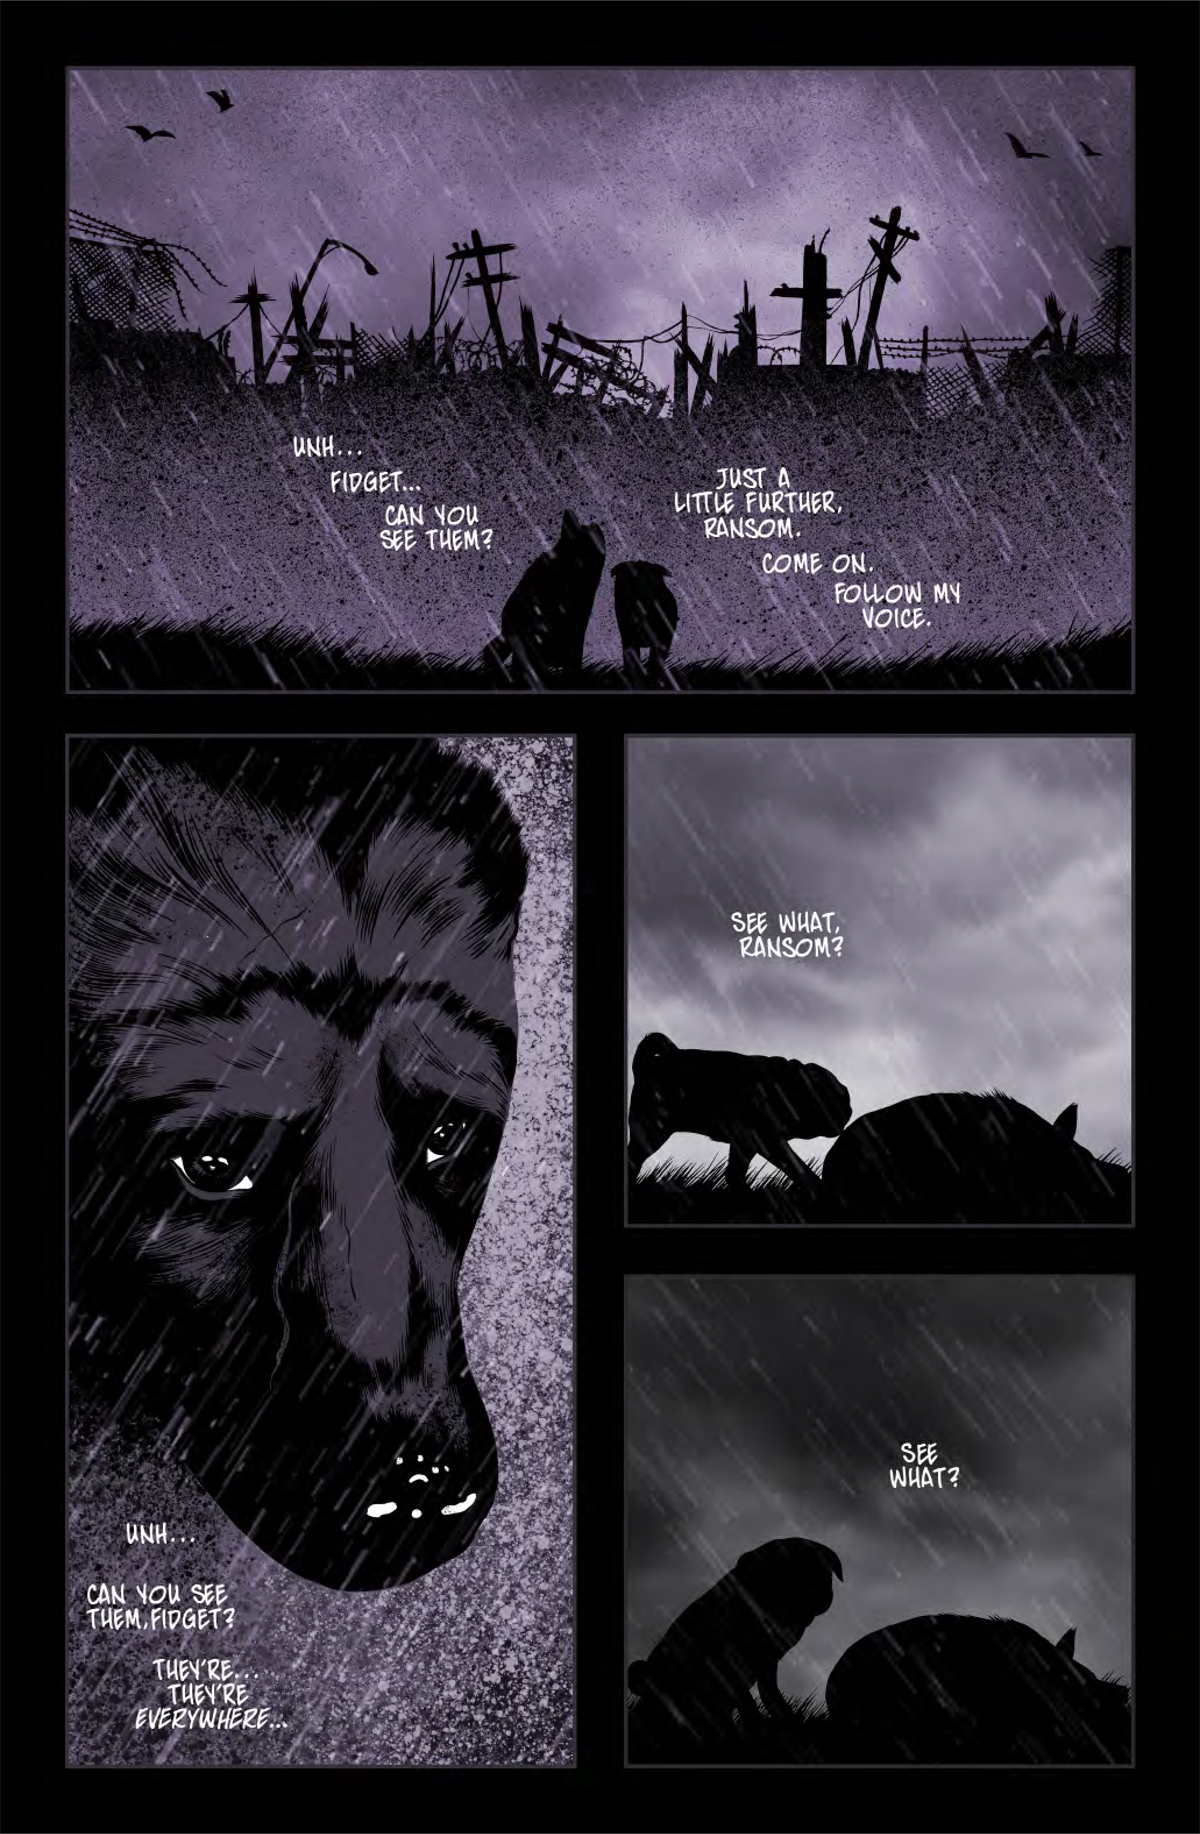 Read The First Issue Of The Fantastic Animal Apocalypse Comic Legend, Here For Free